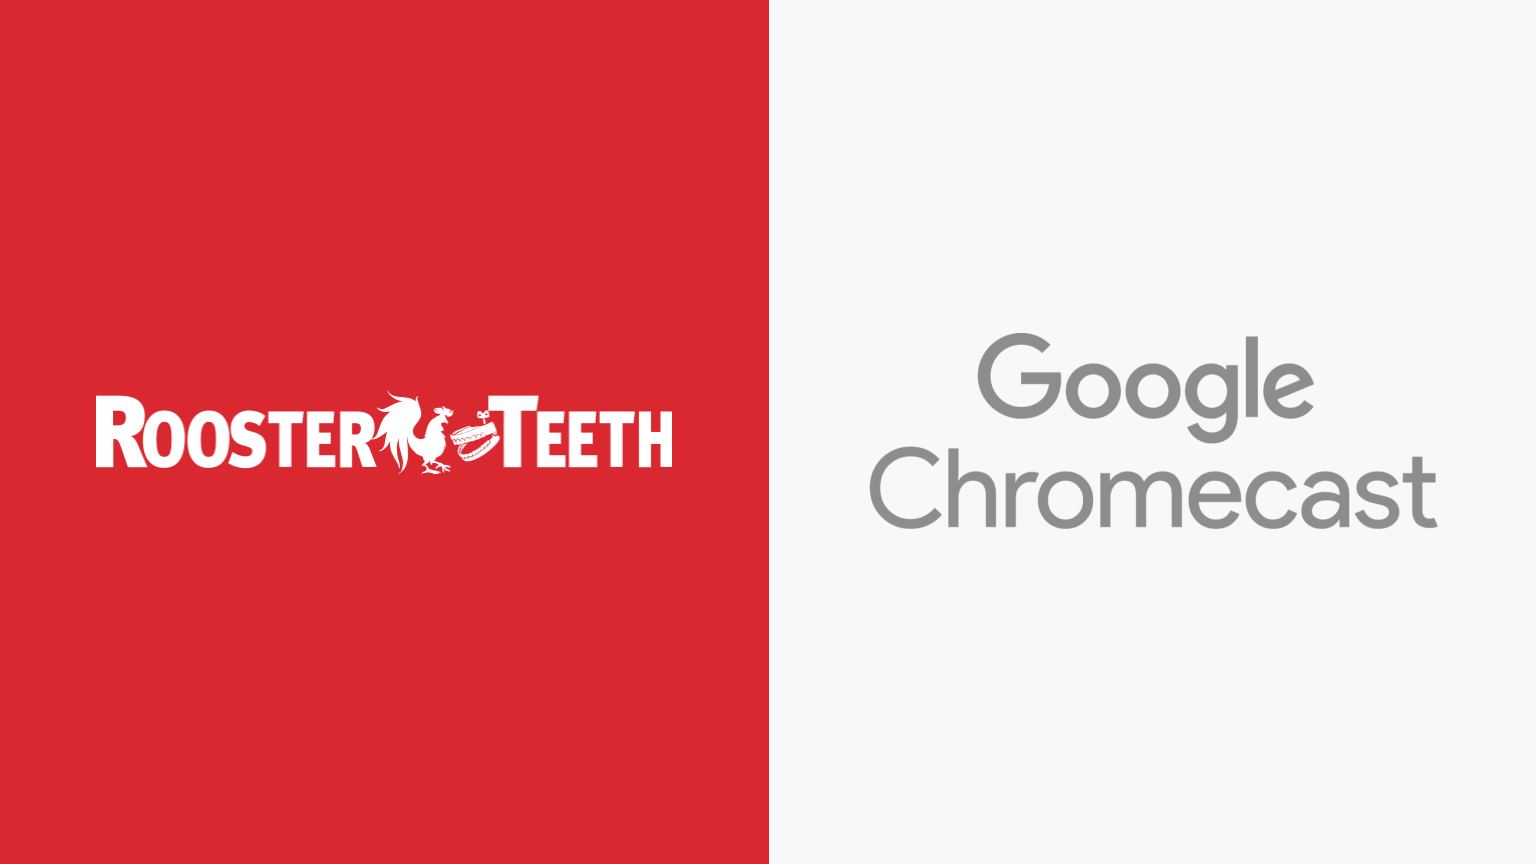 backup spole Kompatibel med How to Watch Rooster Teeth on Google Chromecast – The Streamable